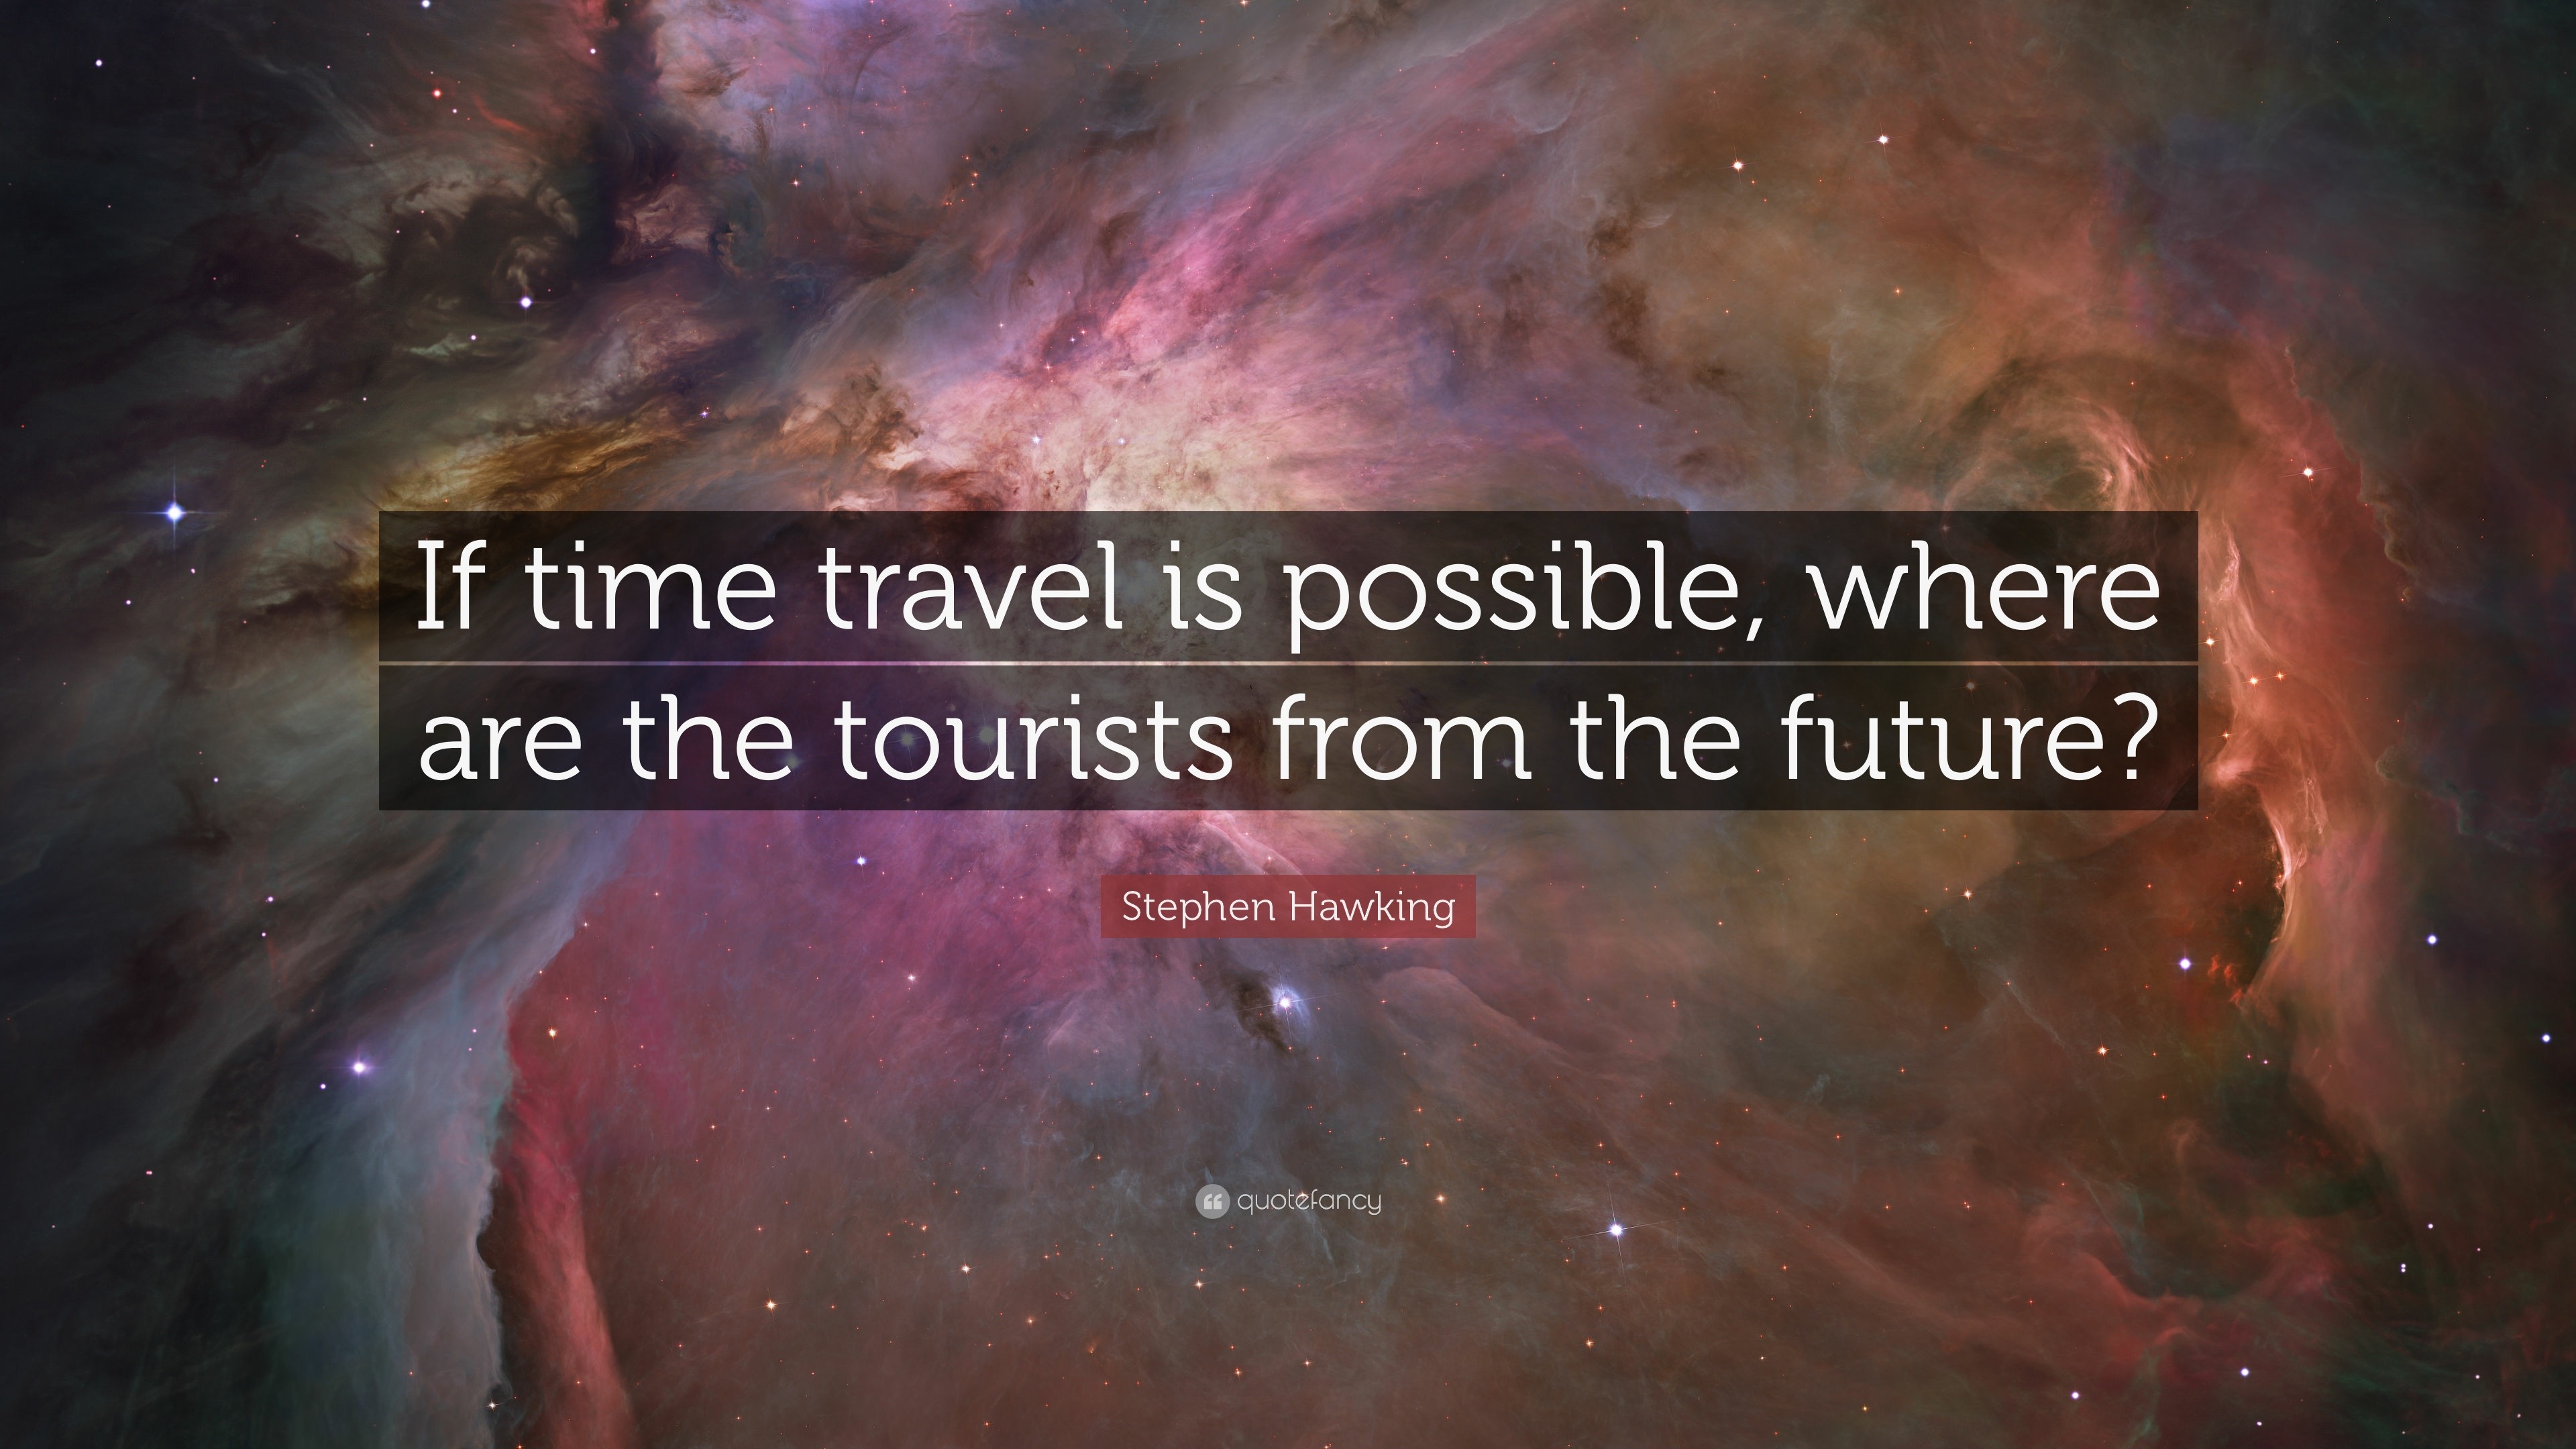 is time travel possible into the future